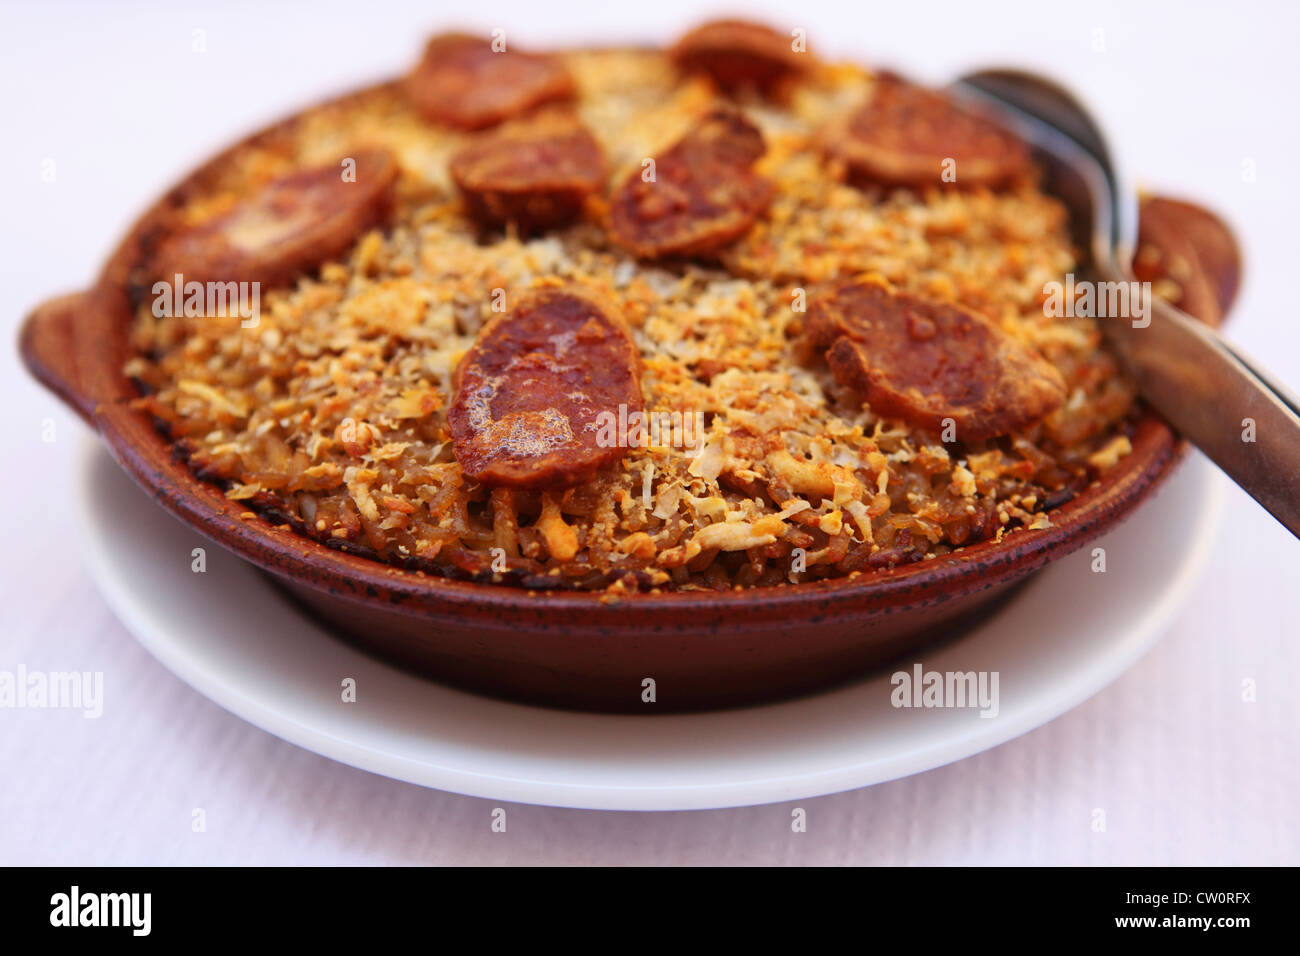 The traditional Portuguese dish of Arroz de Pato (rice with duck) is served. Stock Photo